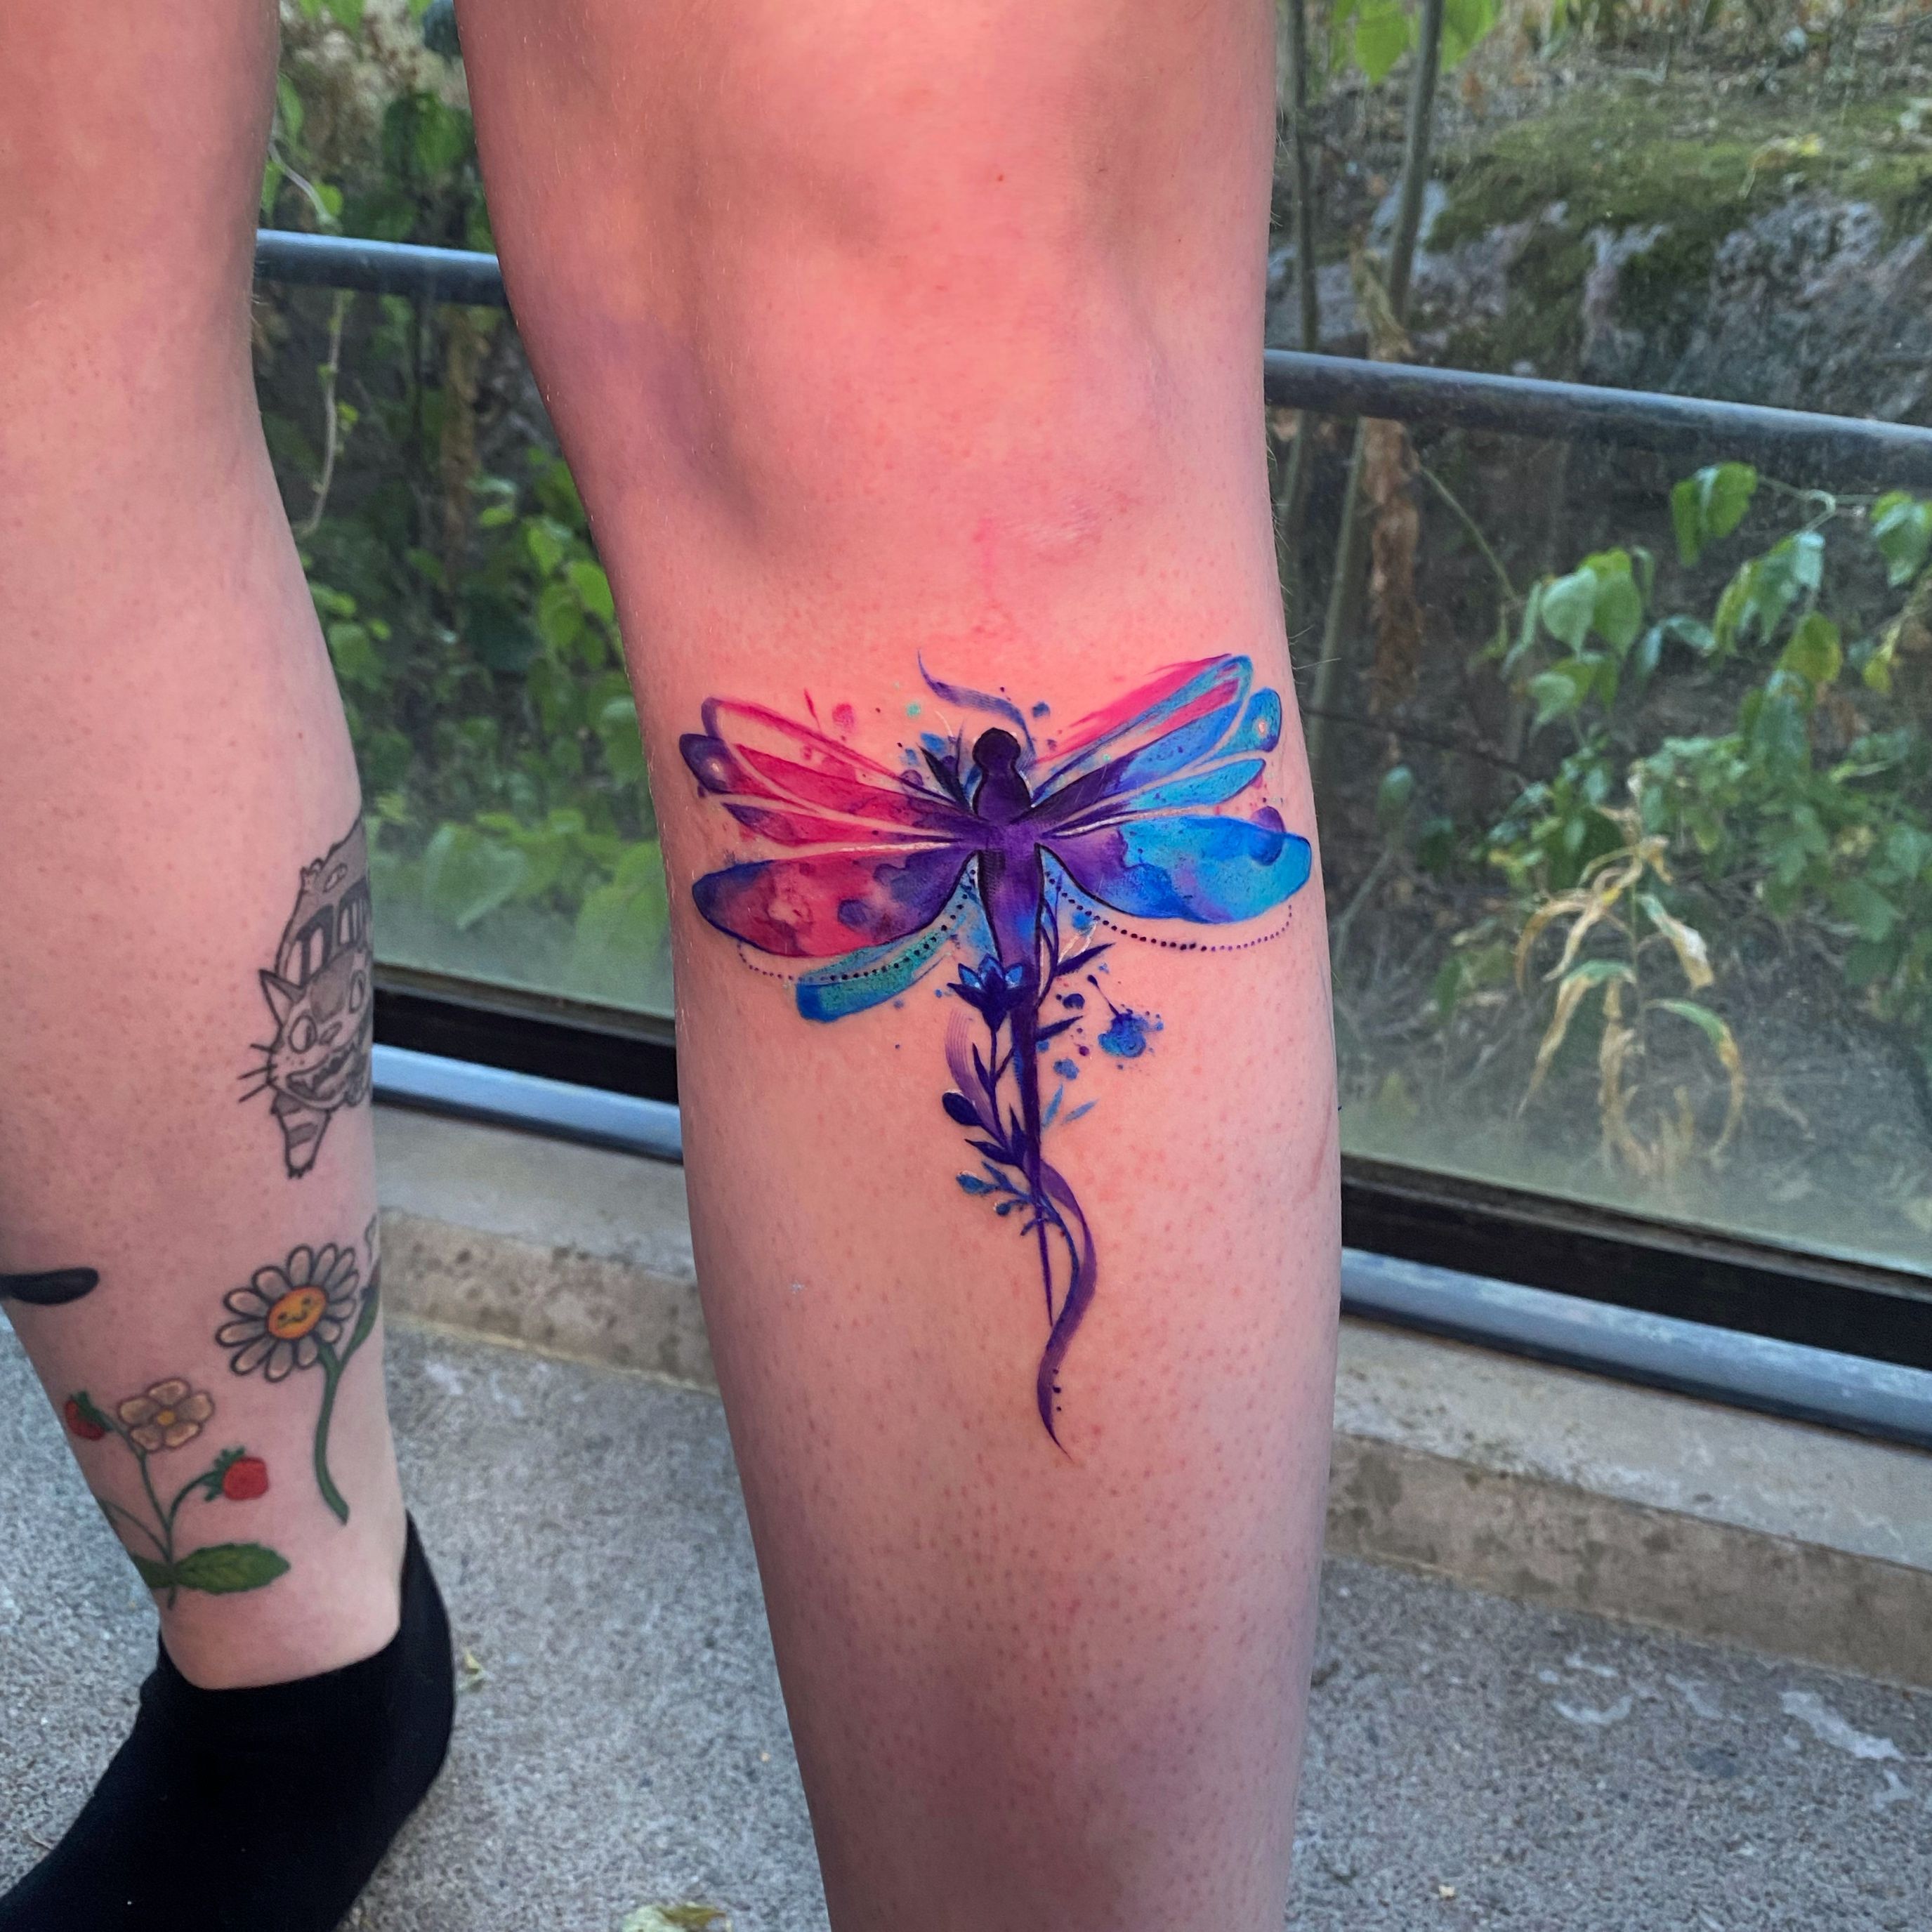 Watercolor Dragonfly Tattoo Stickers Large Temporary Tattoos For Women  Beautiful | eBay